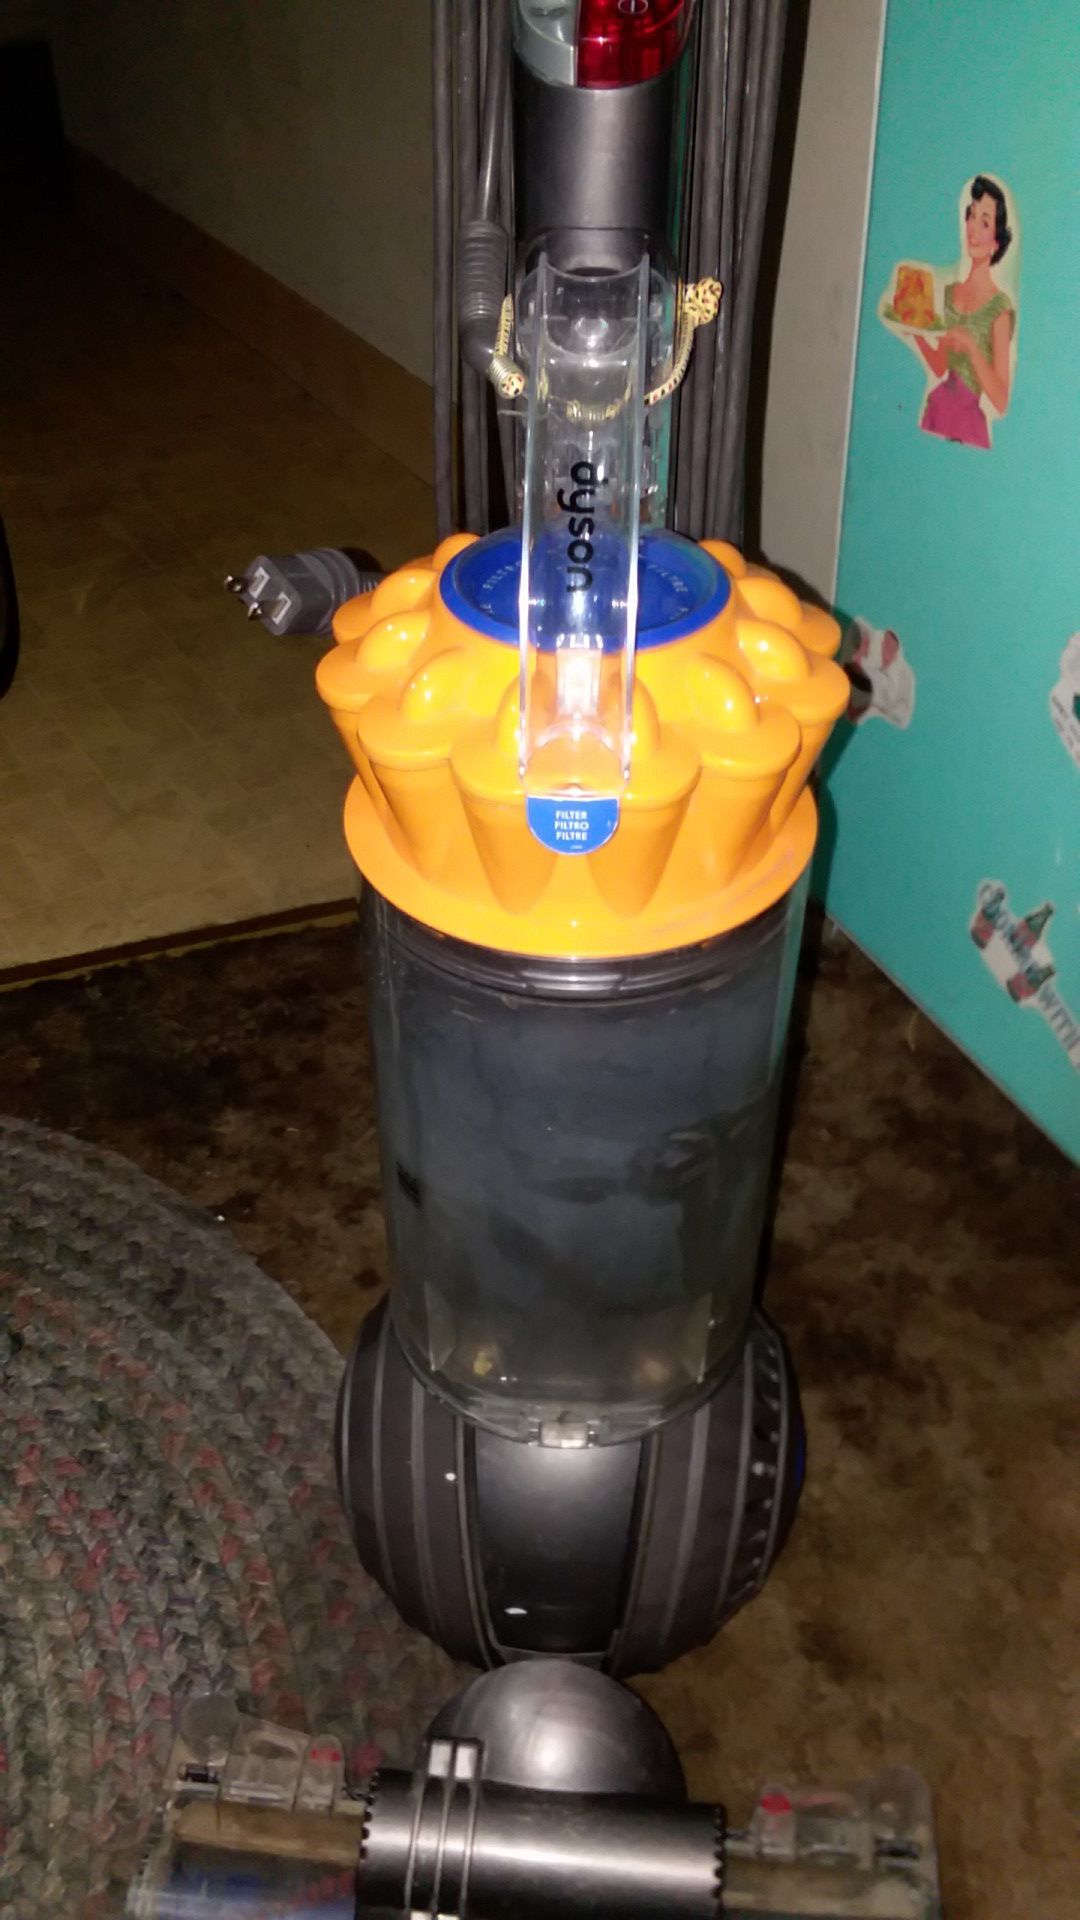 Dyson ball vacuum cleaner